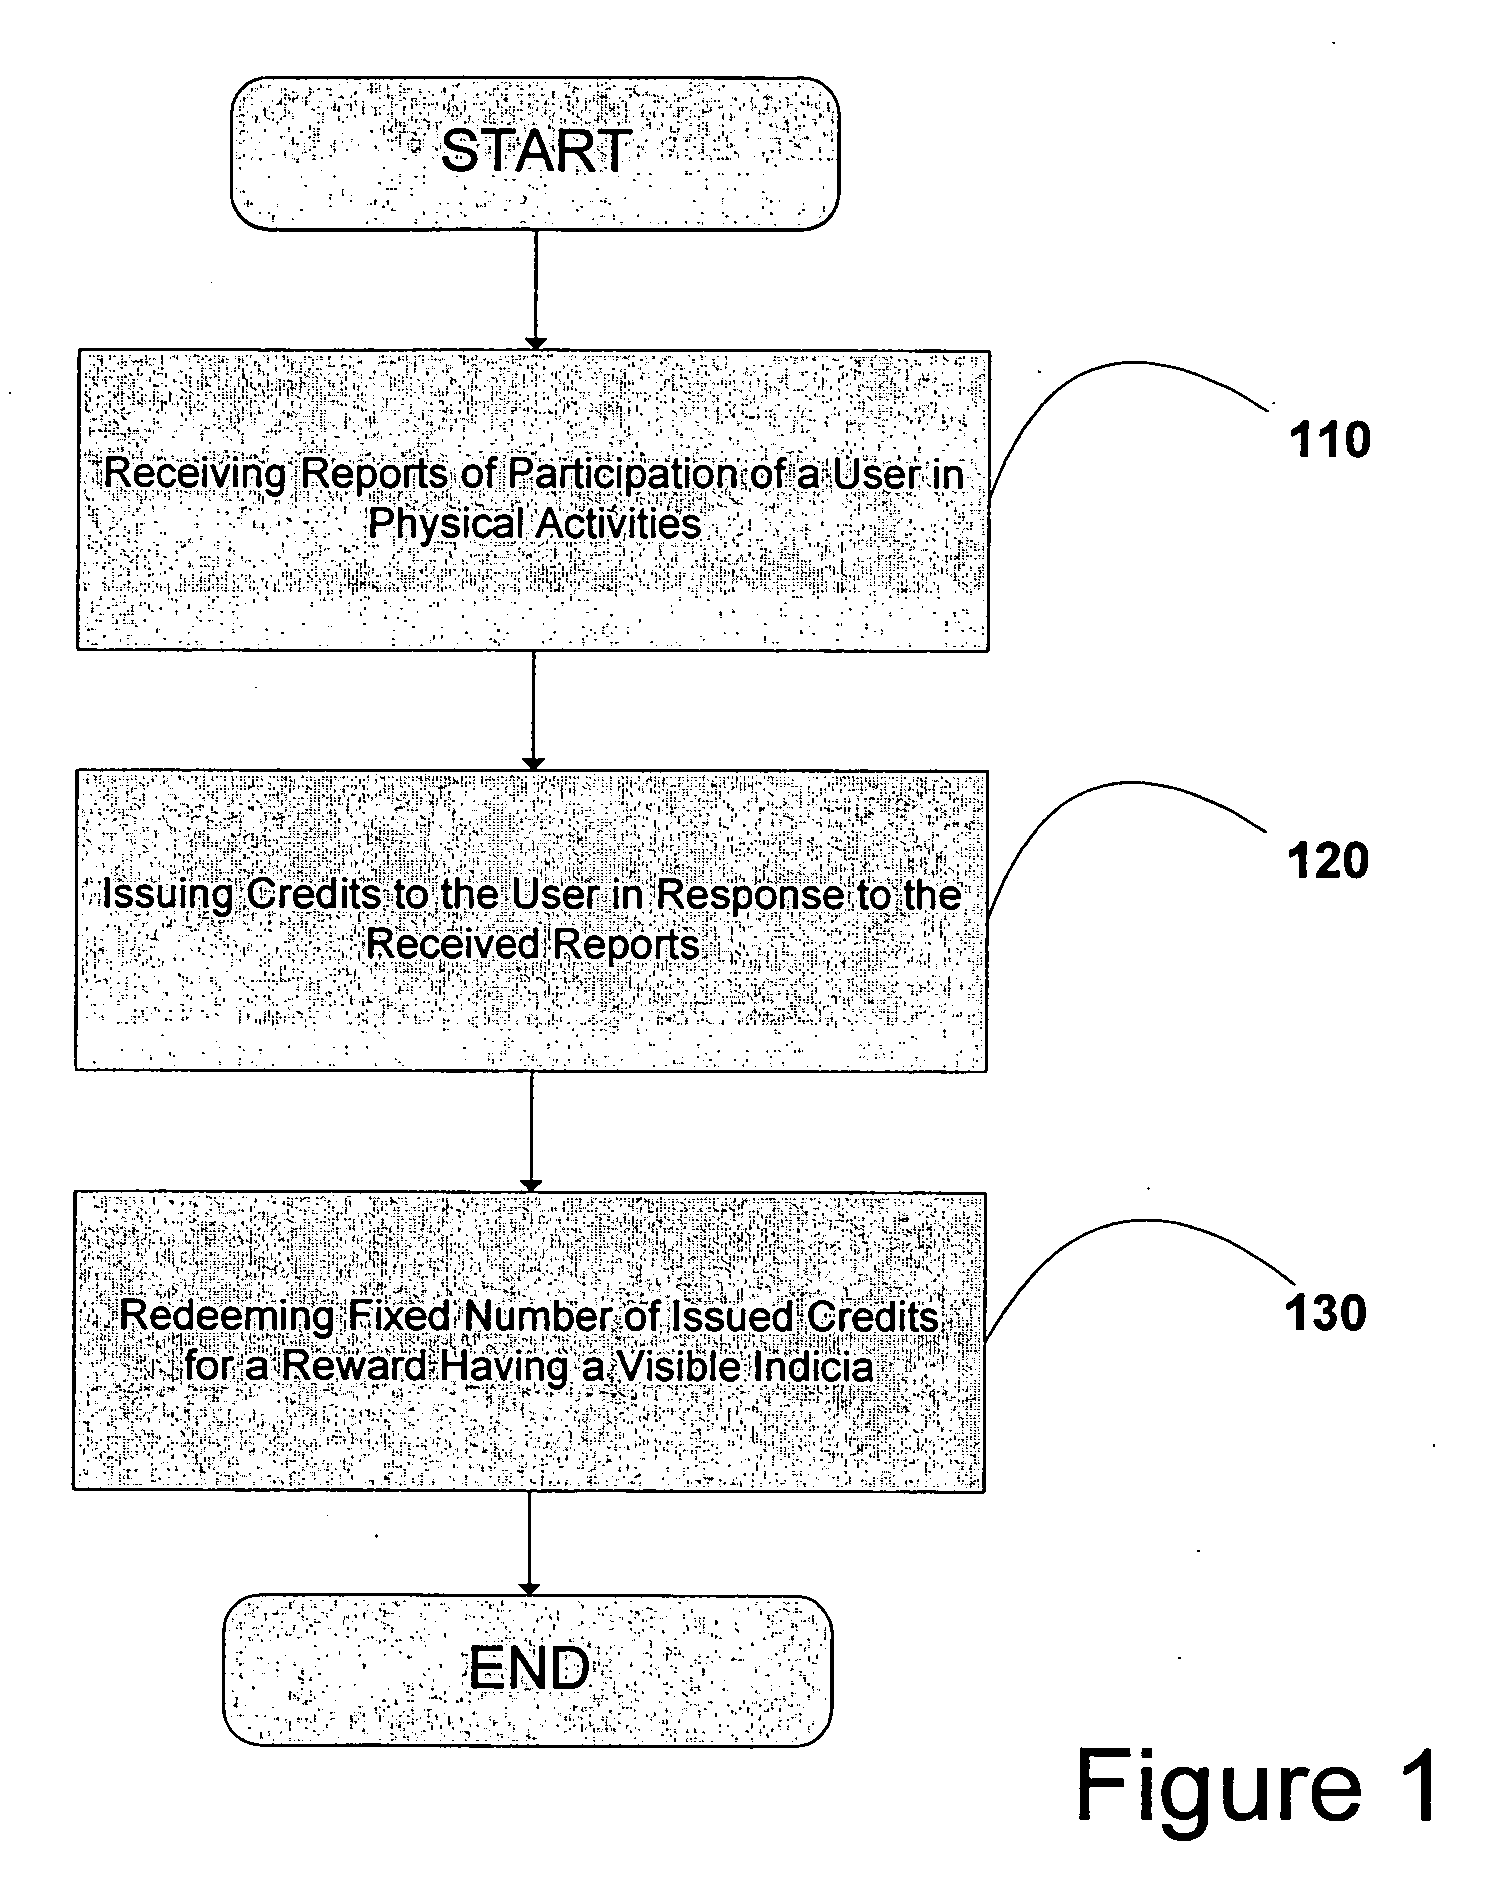 System and method for providing rewards including visible indicia thereon to a user to encourage physical activity and to encourage the accurate reporting of physical activity